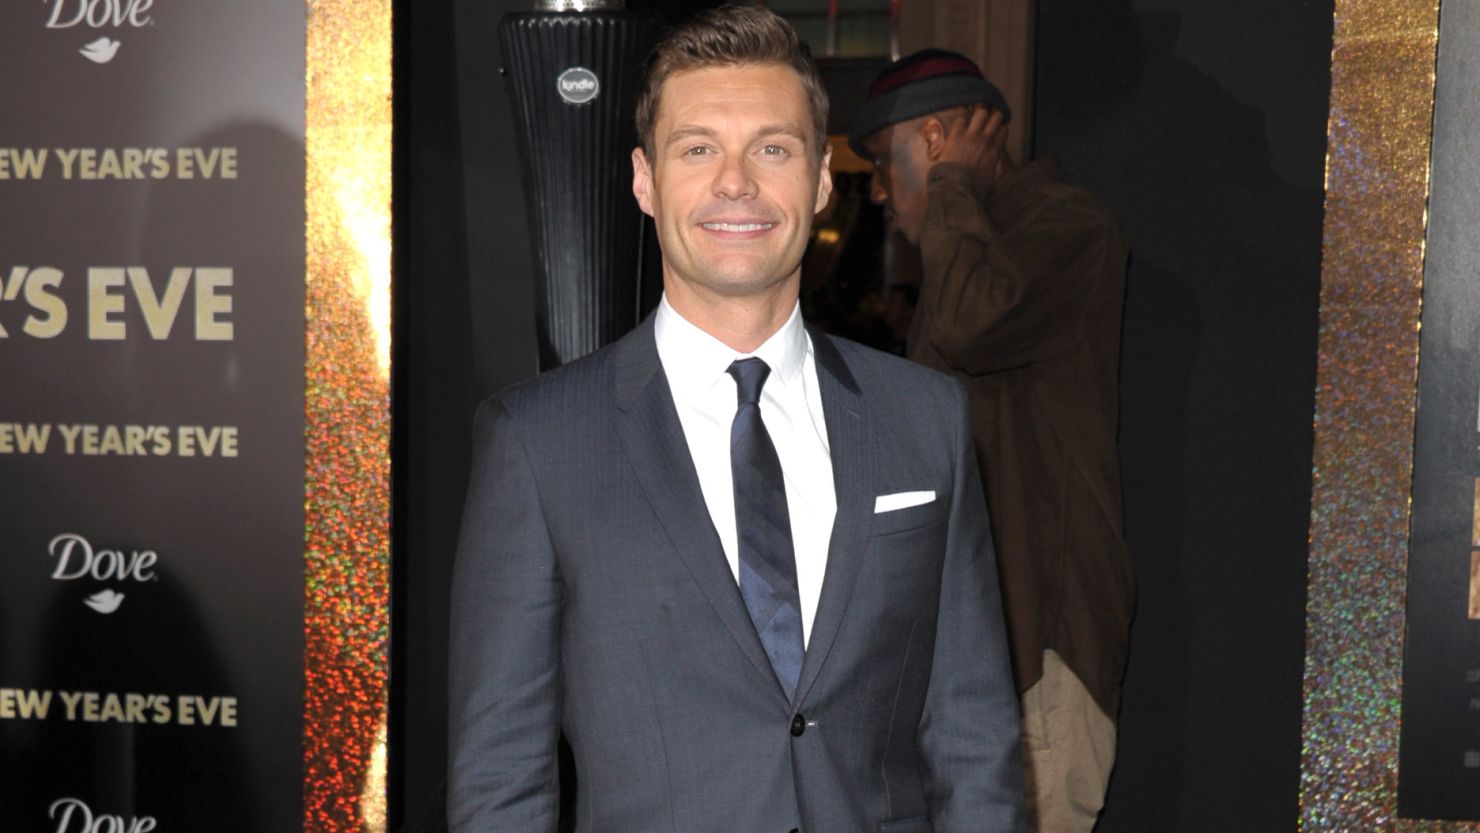 Ryan Seacrest may soon be adding more work to his already successful career.